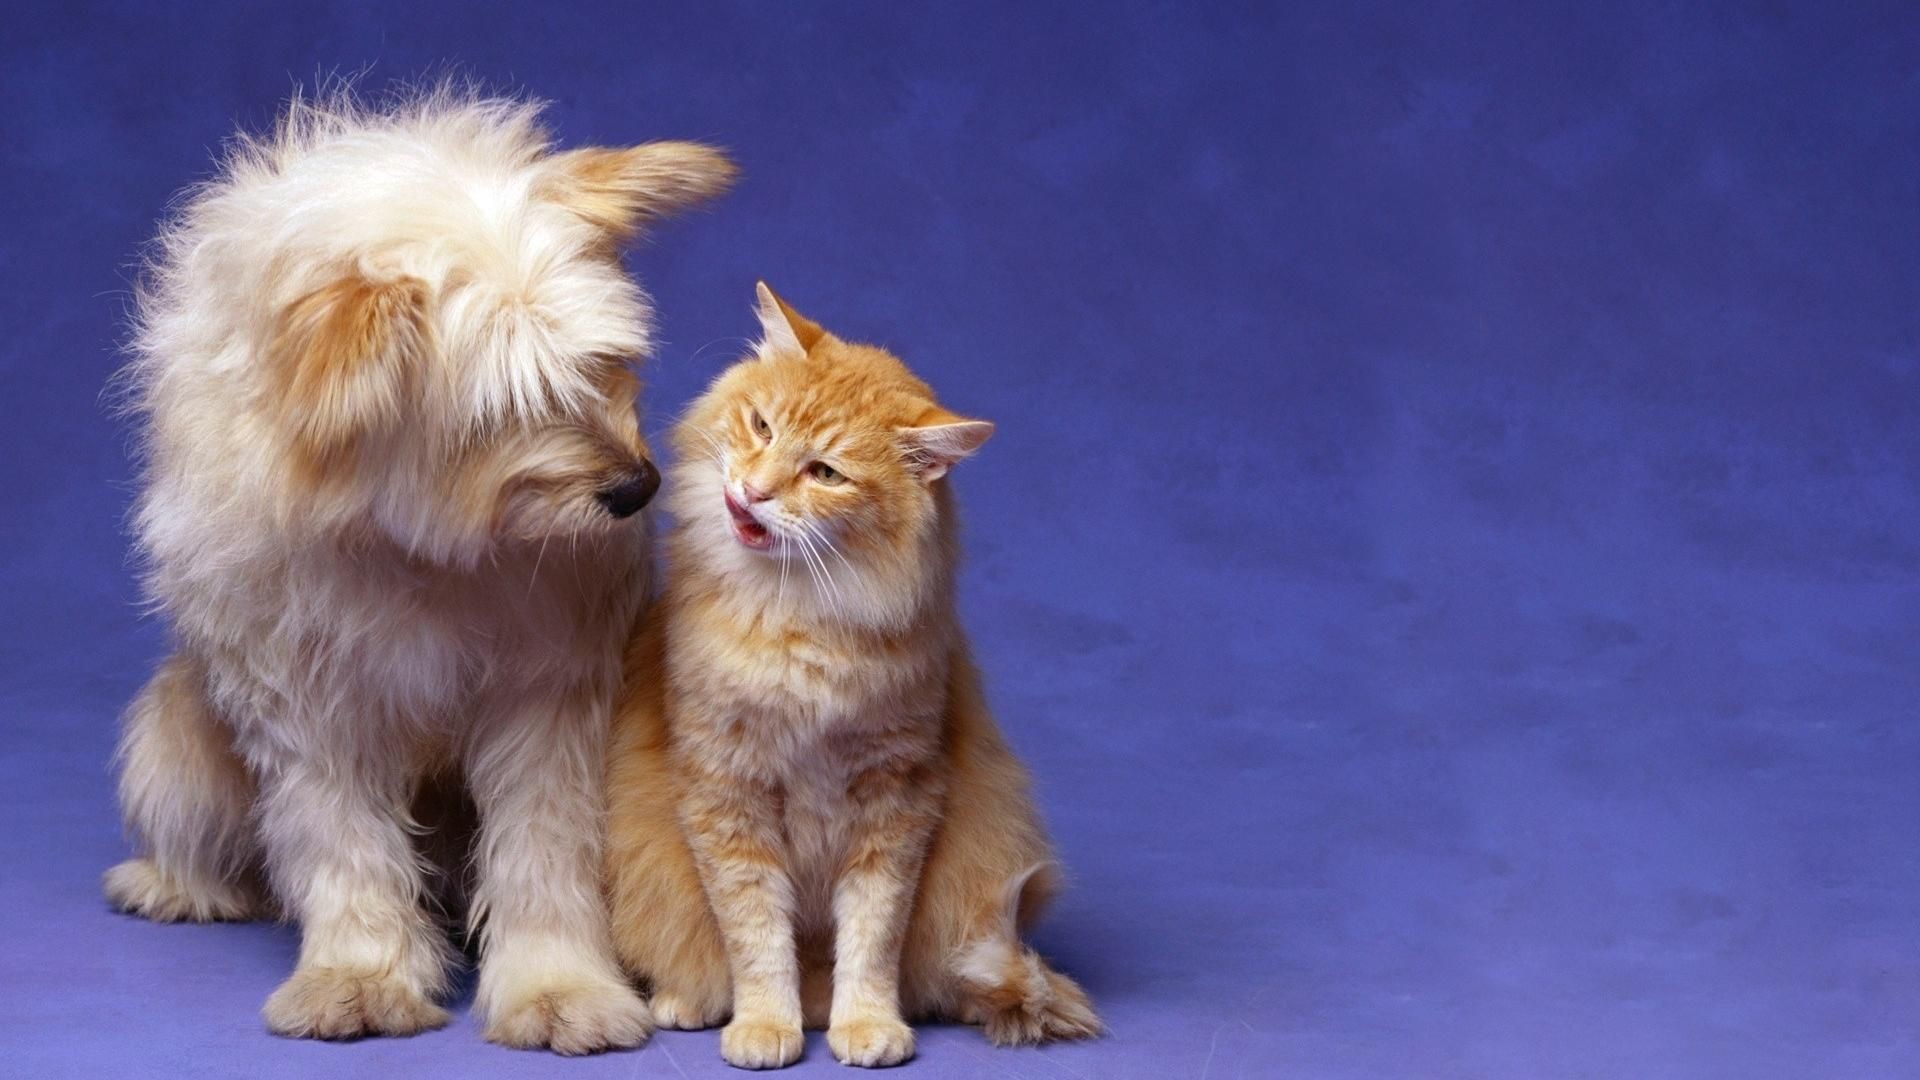 1920x1080 Cat And Dog Wallpapers Wallpaper